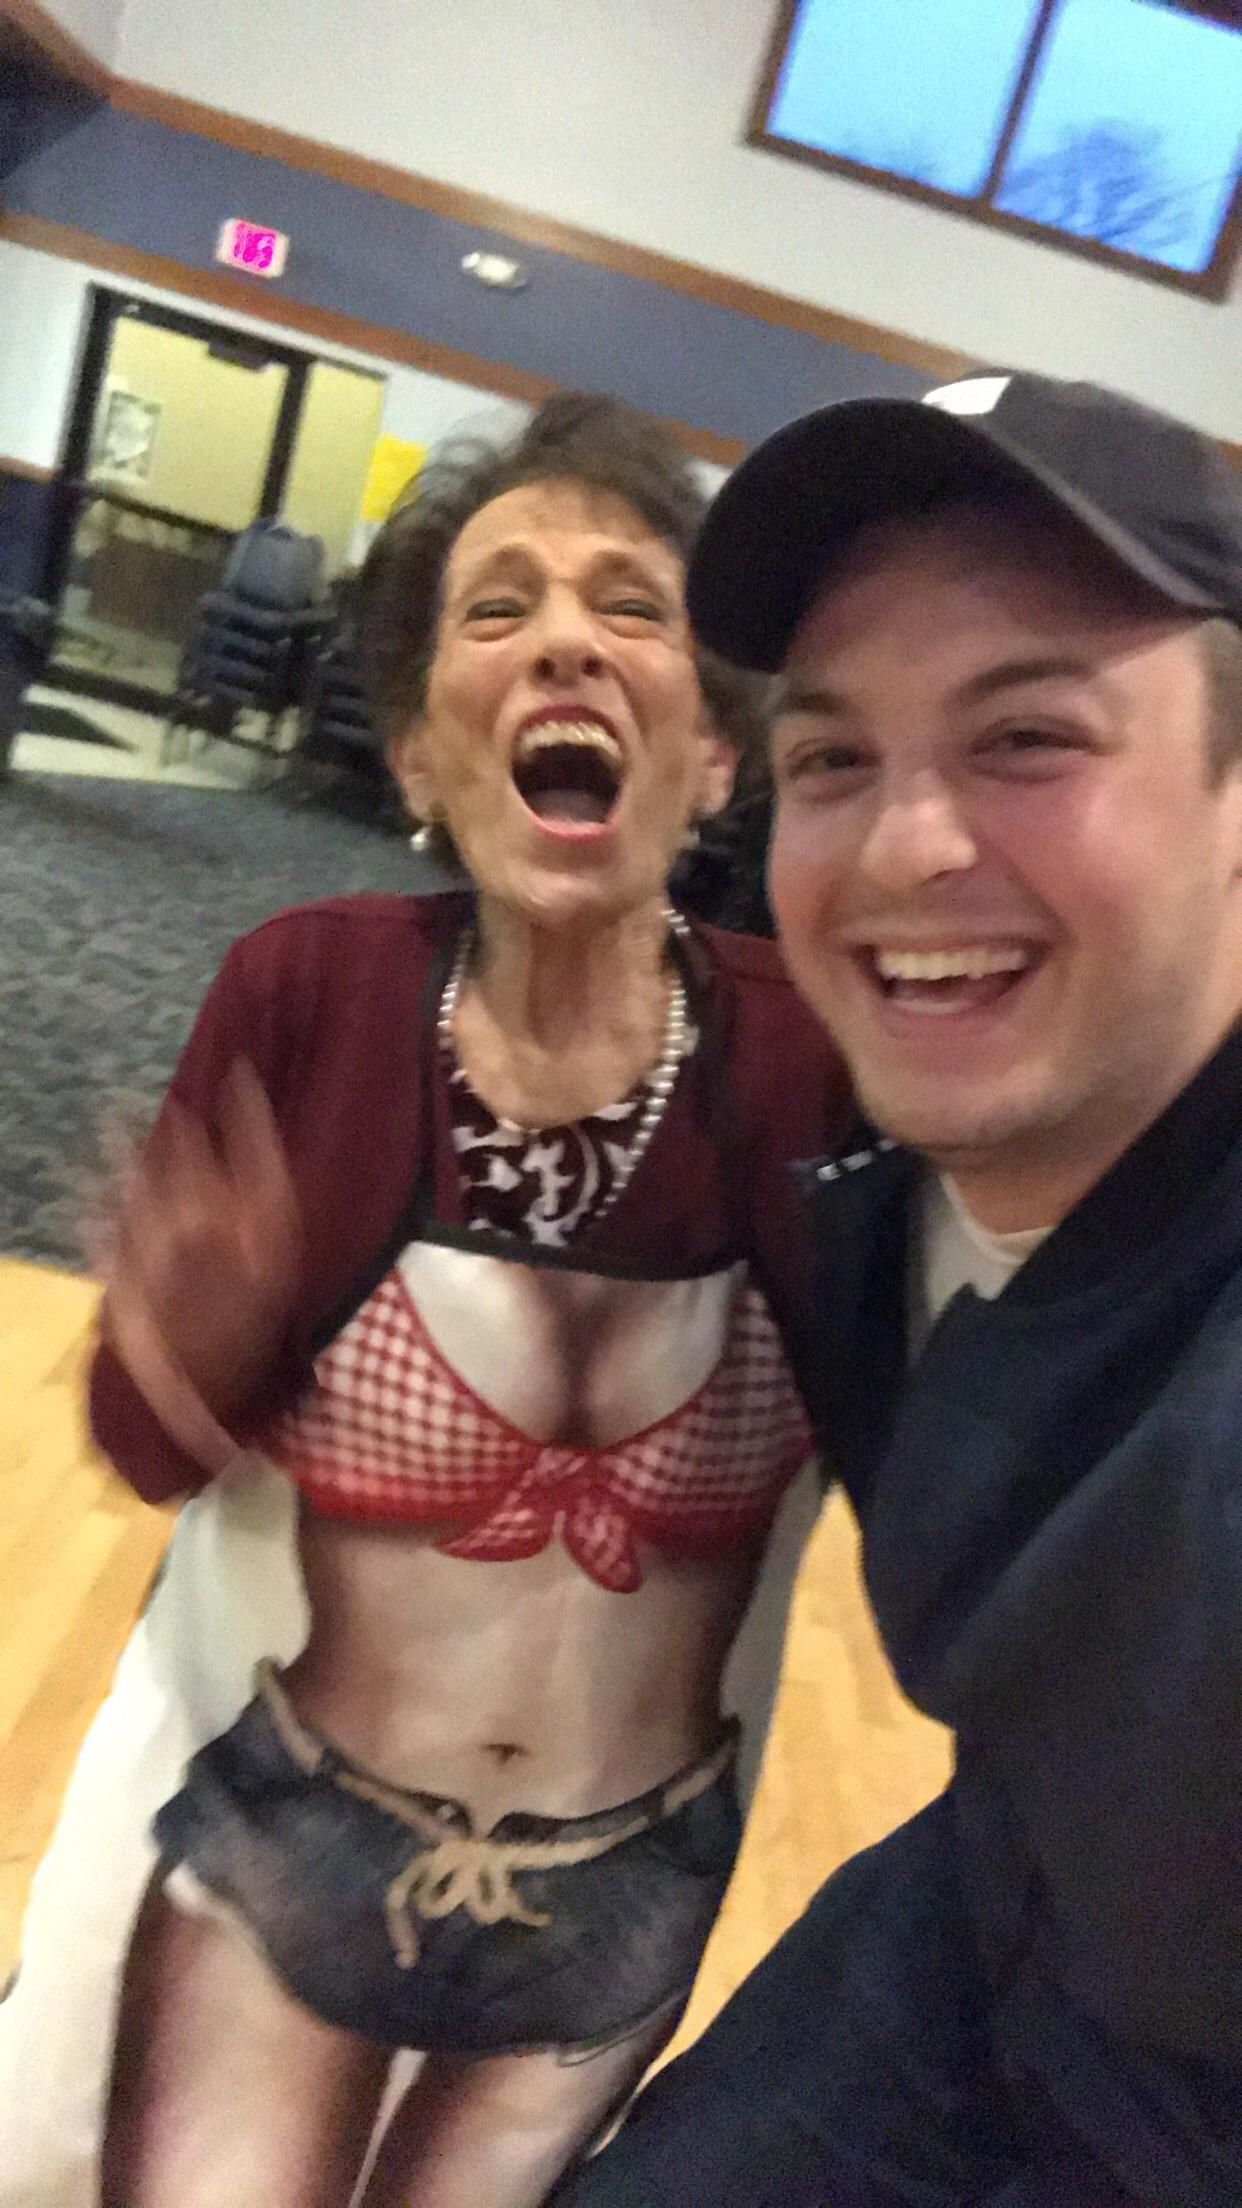 got my gram a new apron for her 90th birthday. this is the moment she realized what was on it